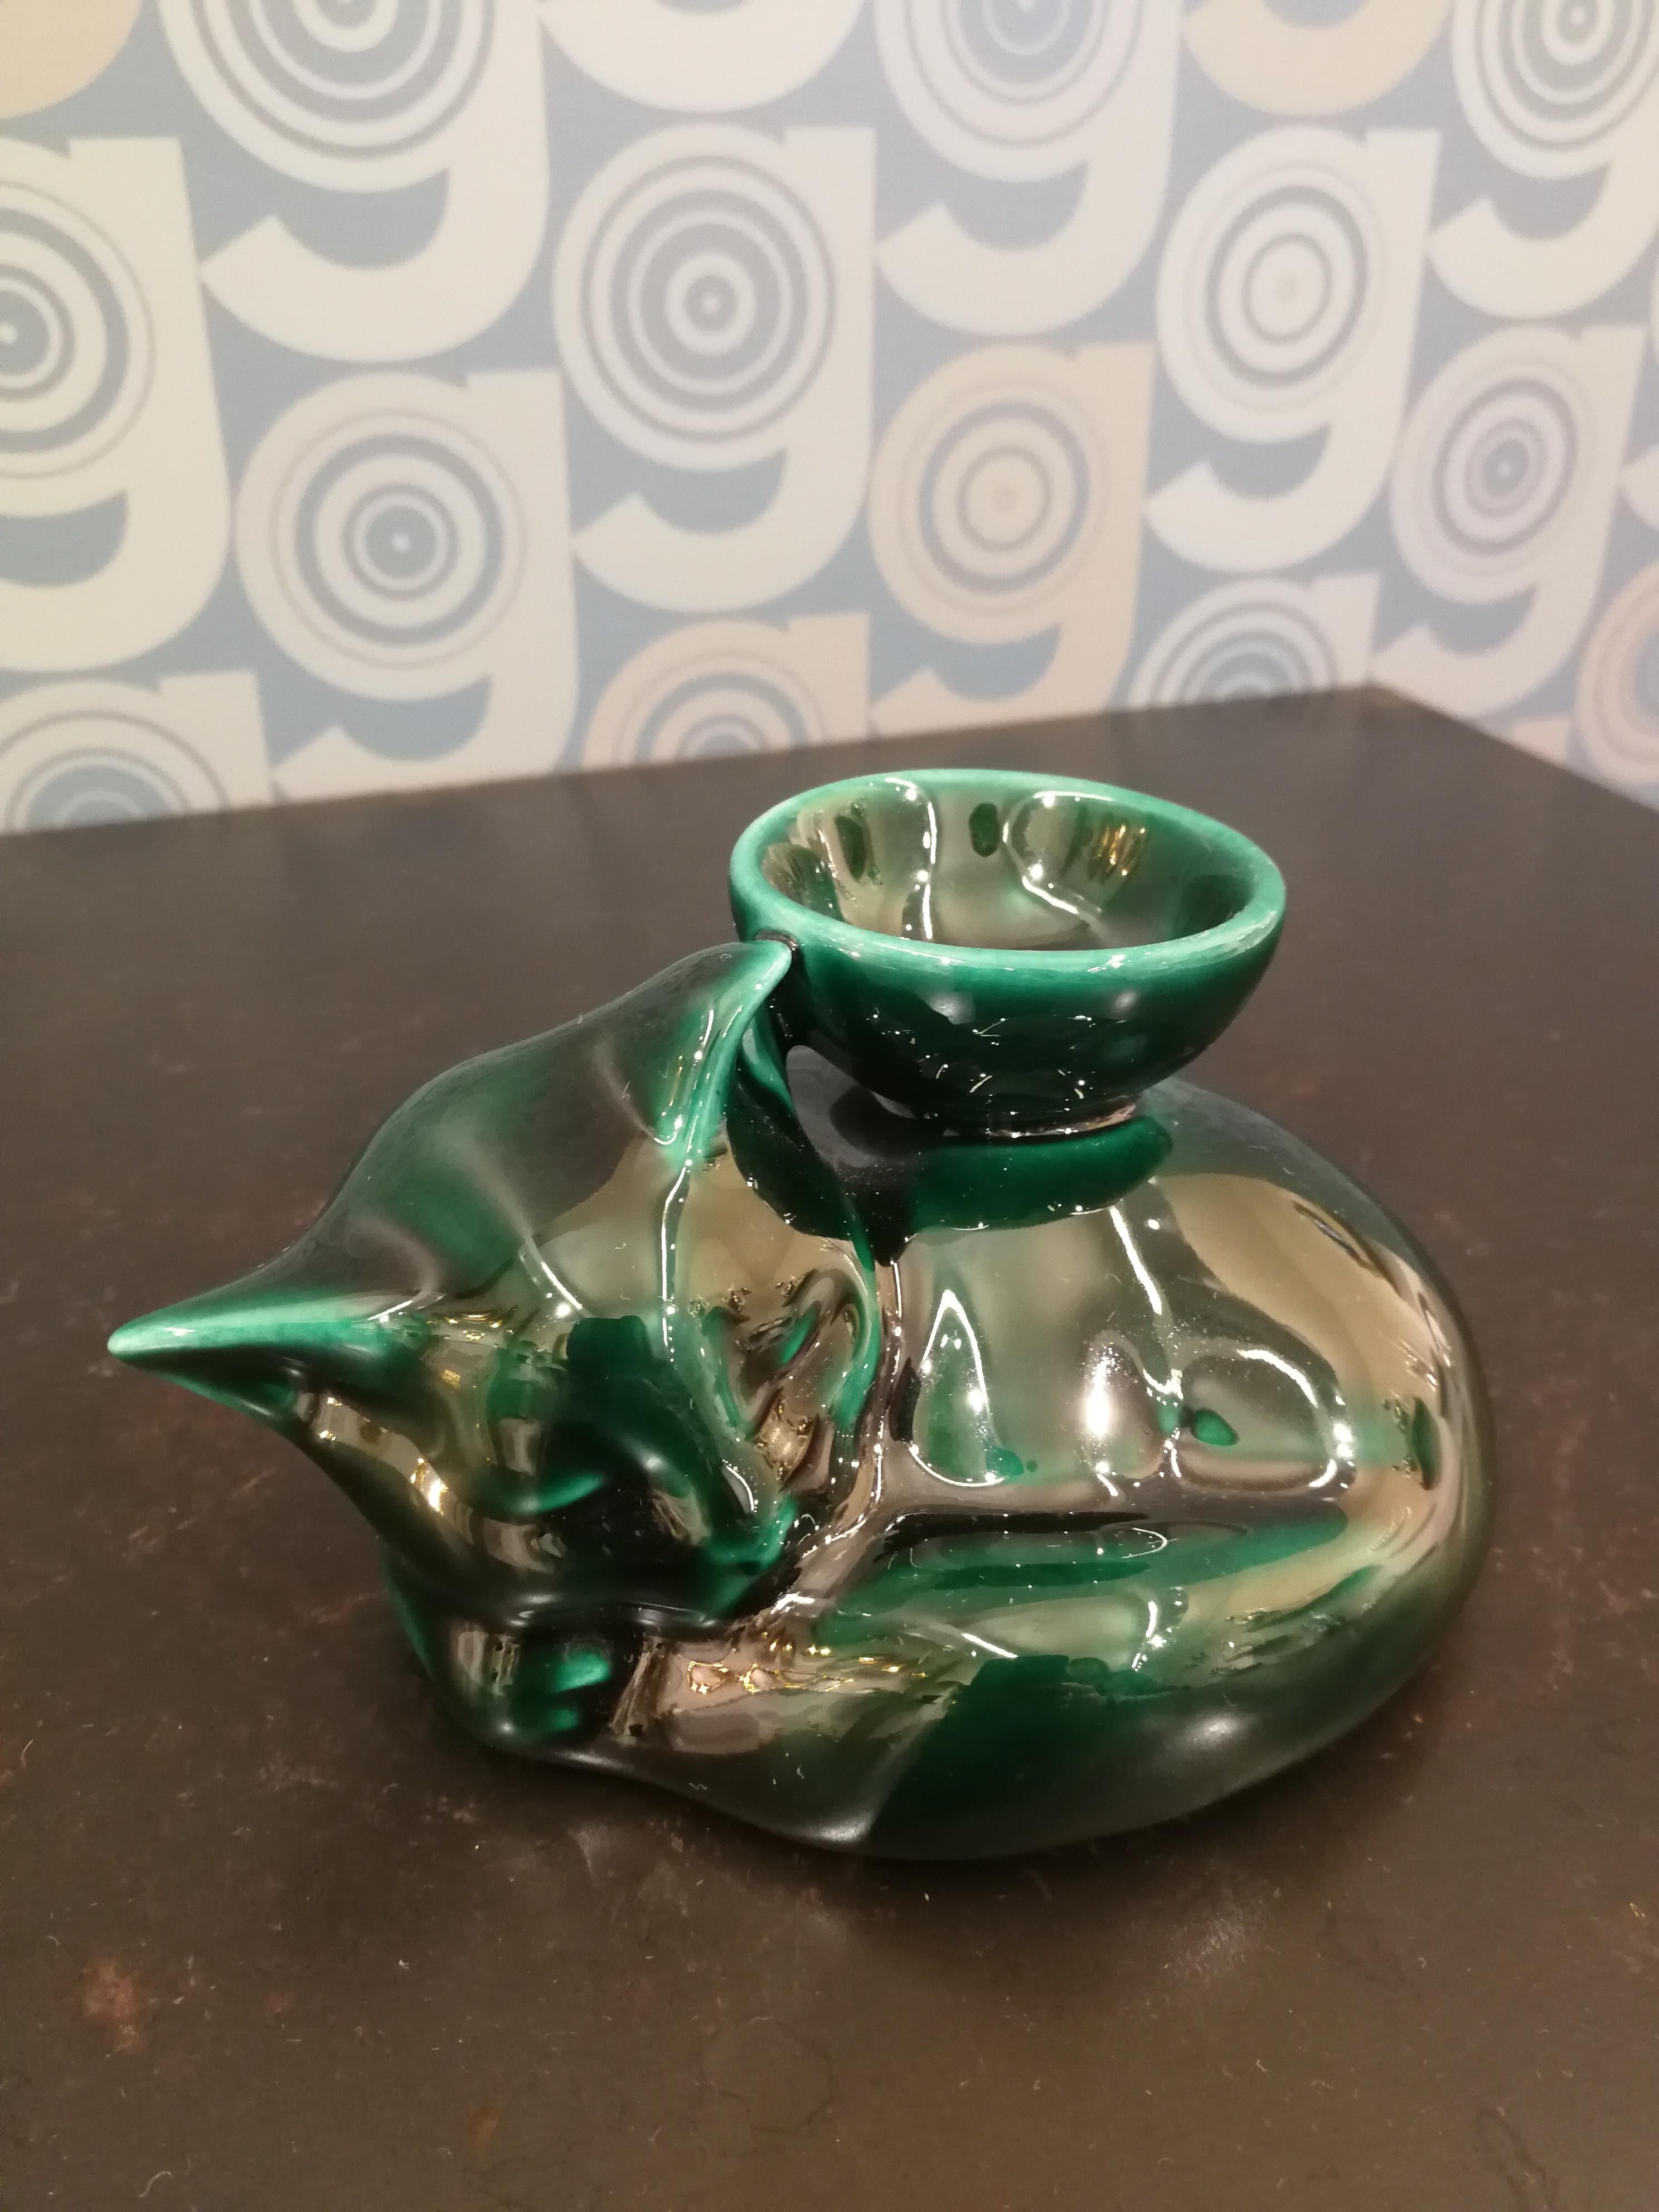 Arts and Crafts Modern Ceramica Gatti 1928 Ceramic Forest Green Kitten Candle Holder For Sale